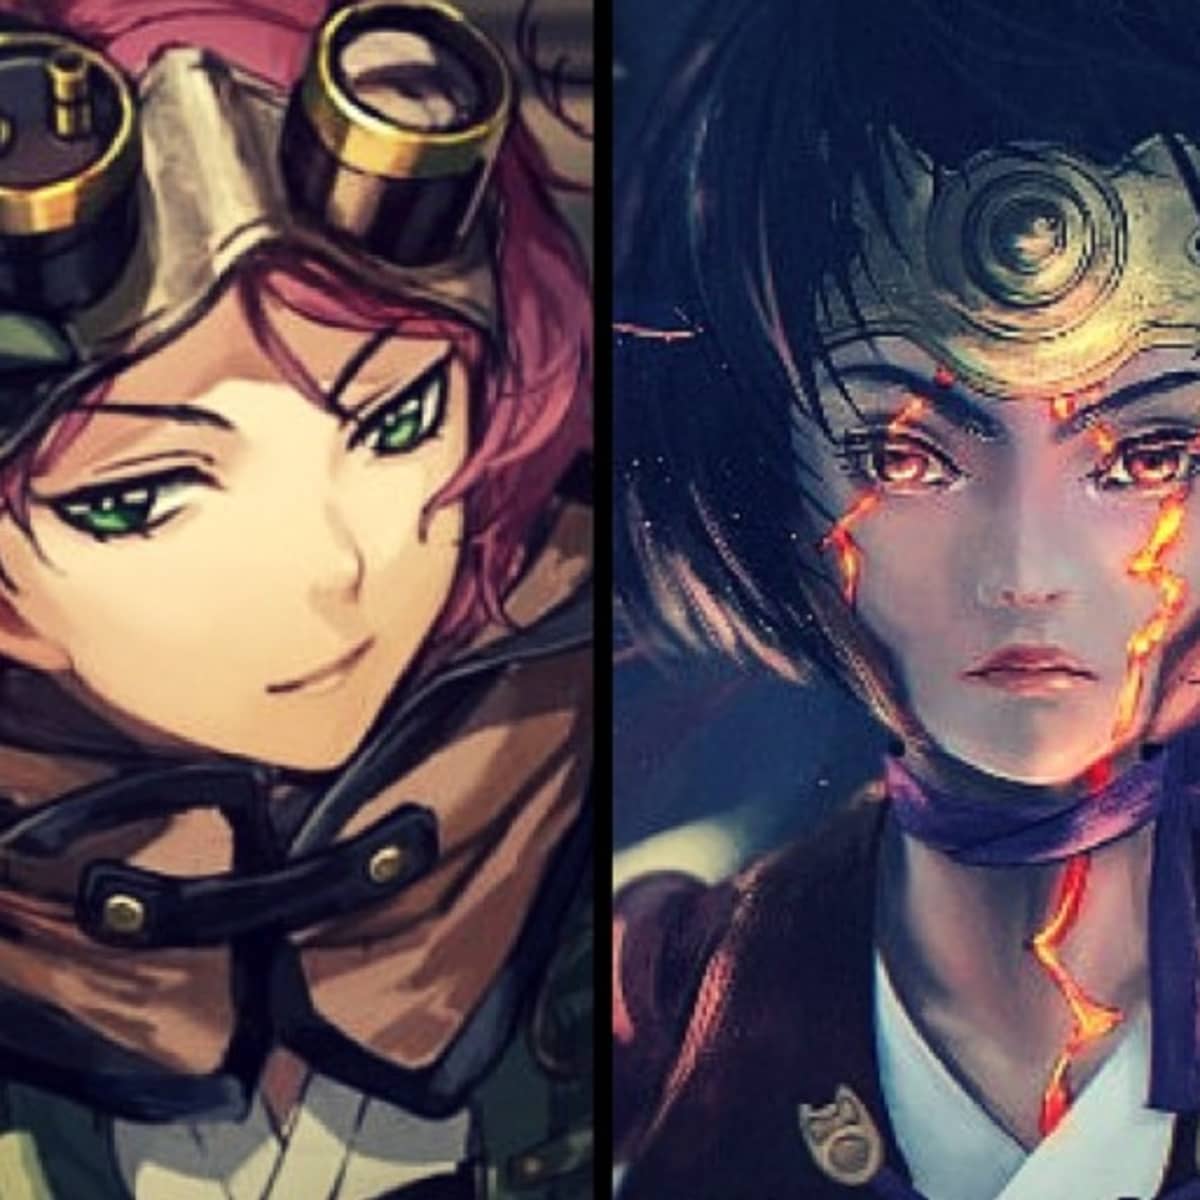 10 Best Anime Mobile Games in 2021